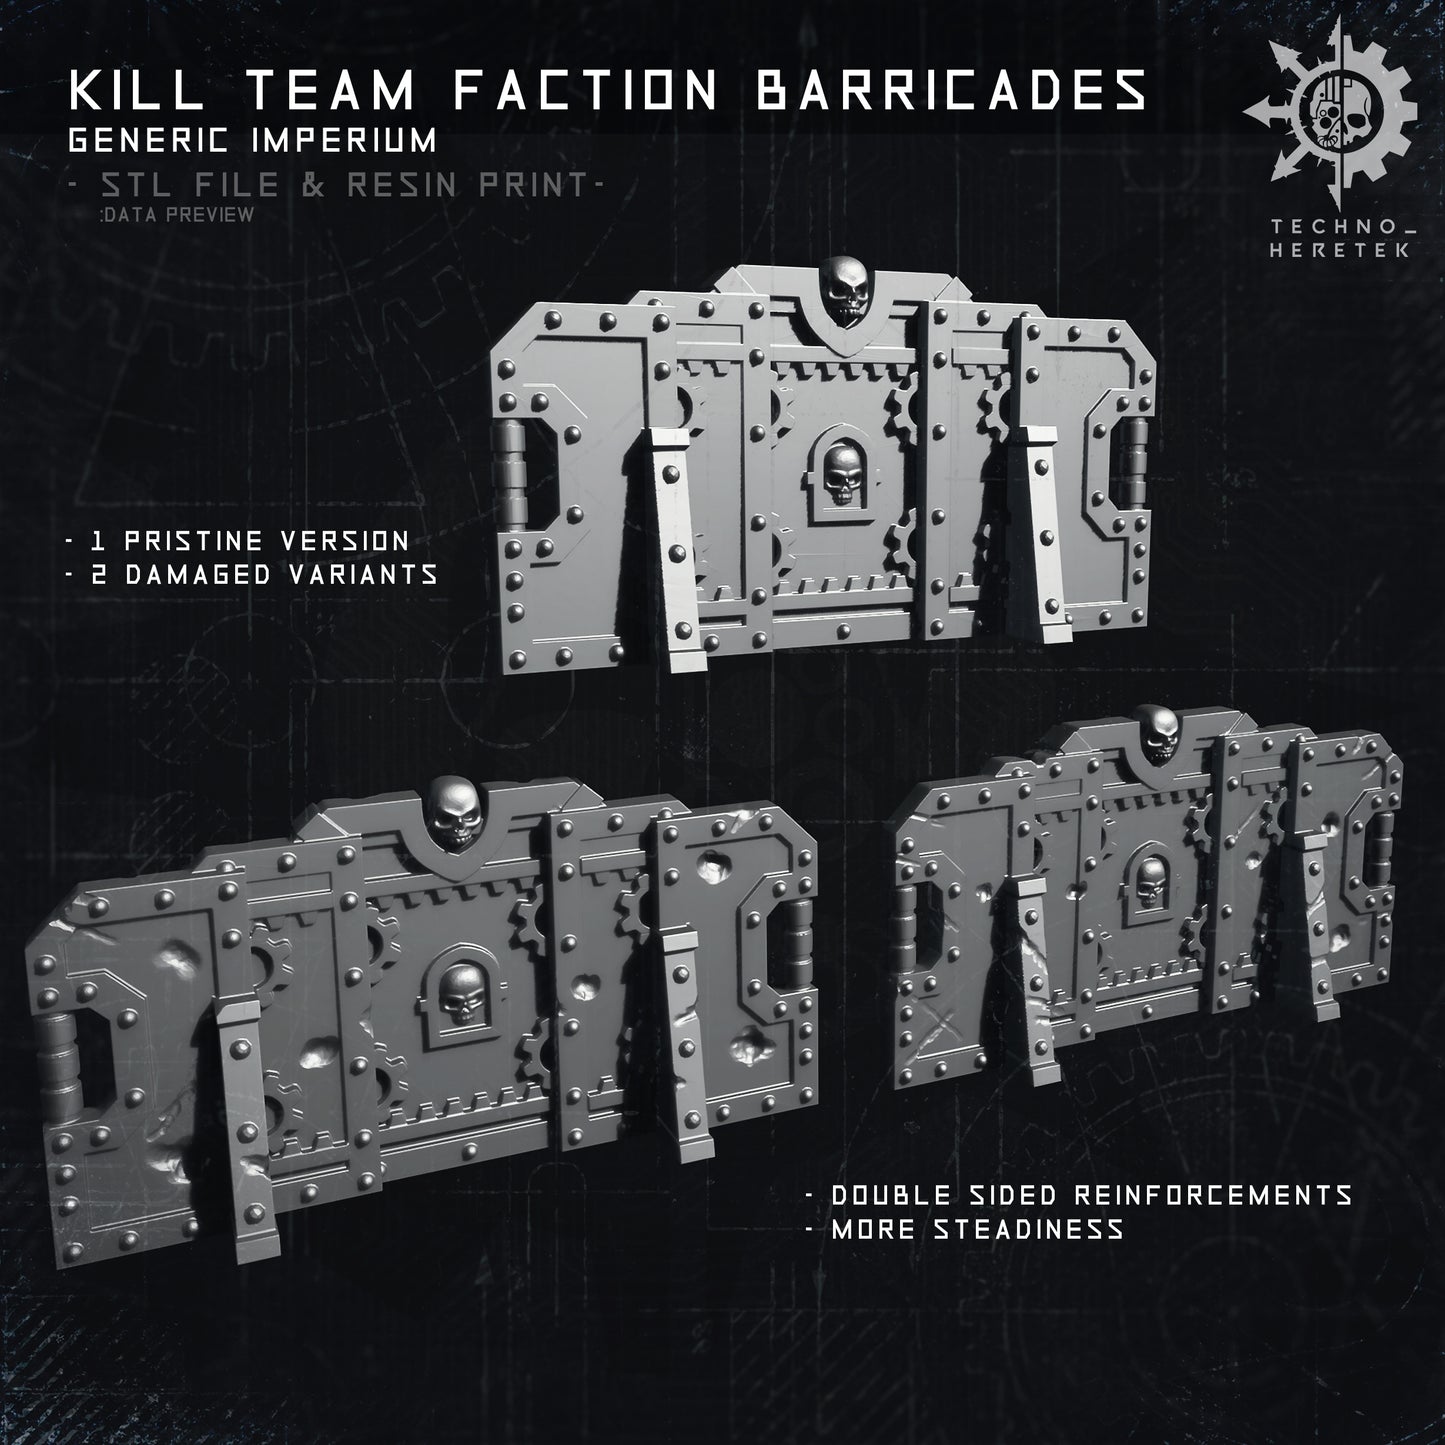 Imperium Faction Faction Barricade for Kill team - STL File Pack